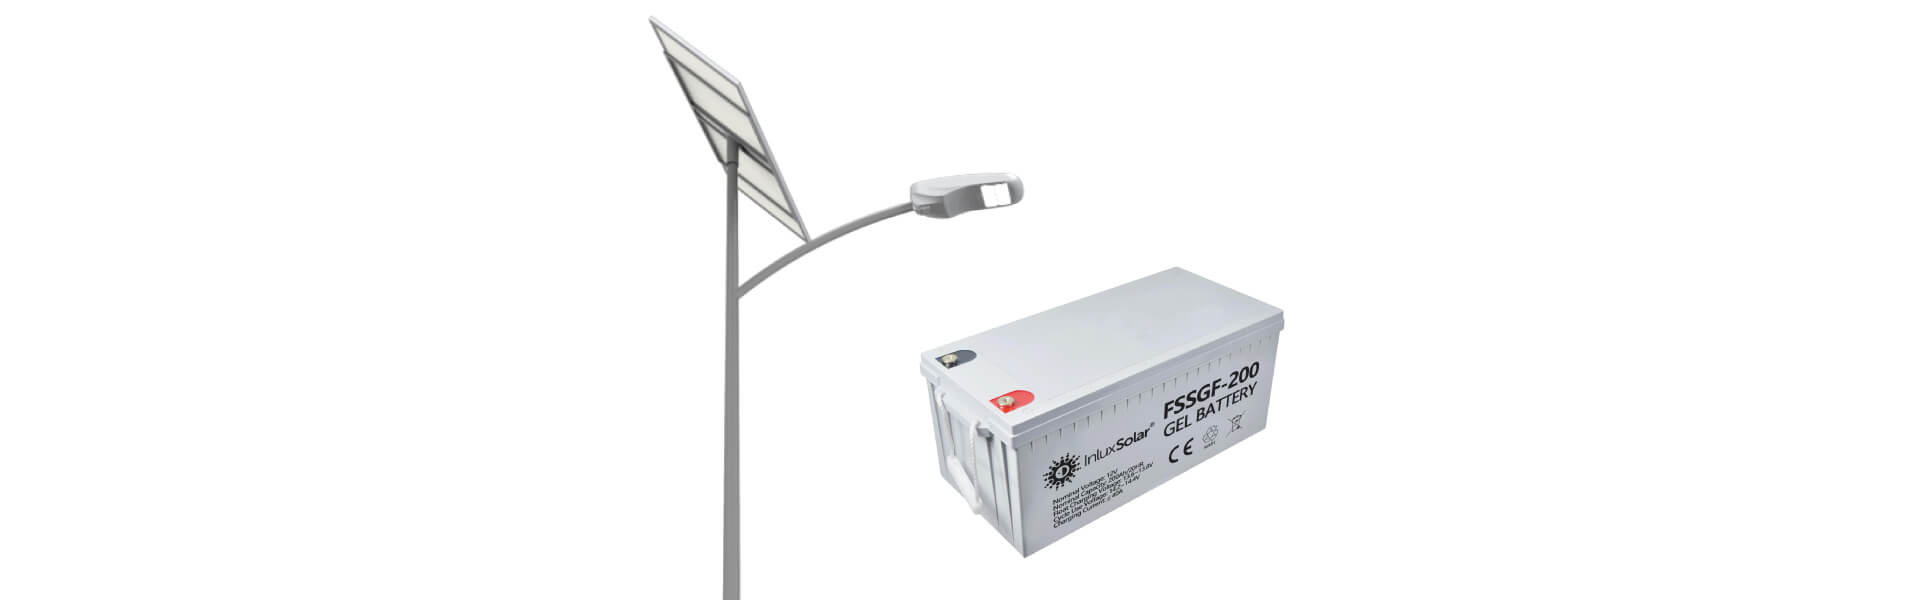 led street light with photocell